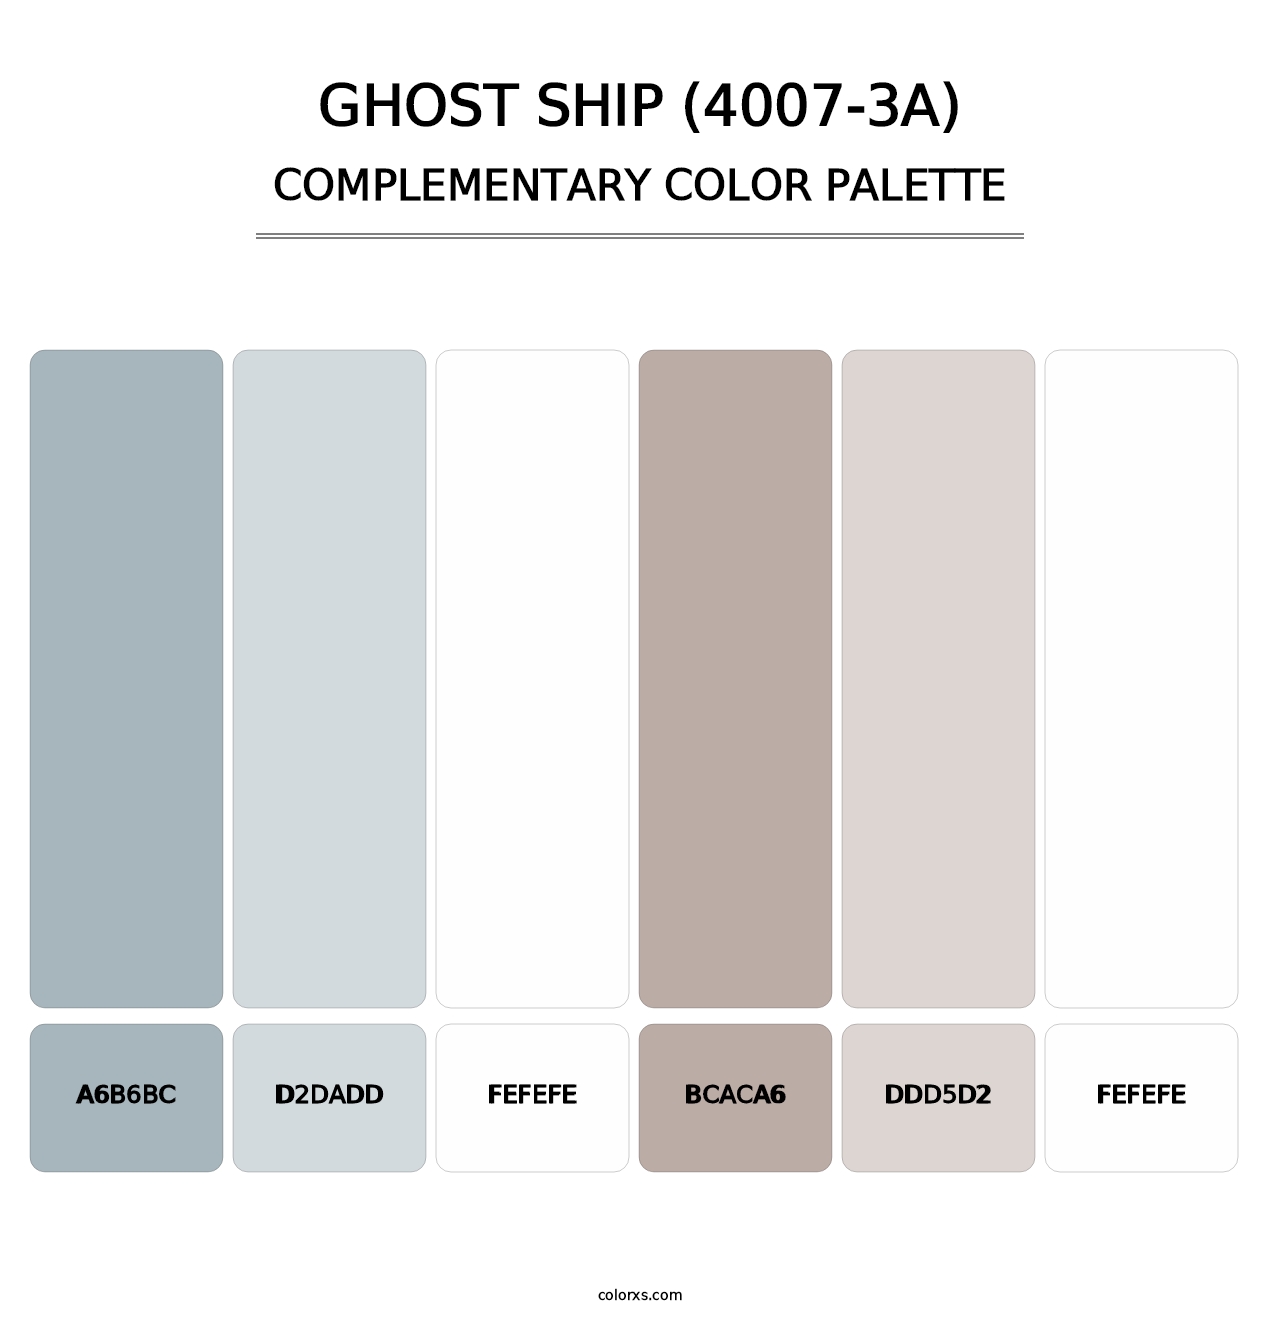 Ghost Ship (4007-3A) - Complementary Color Palette